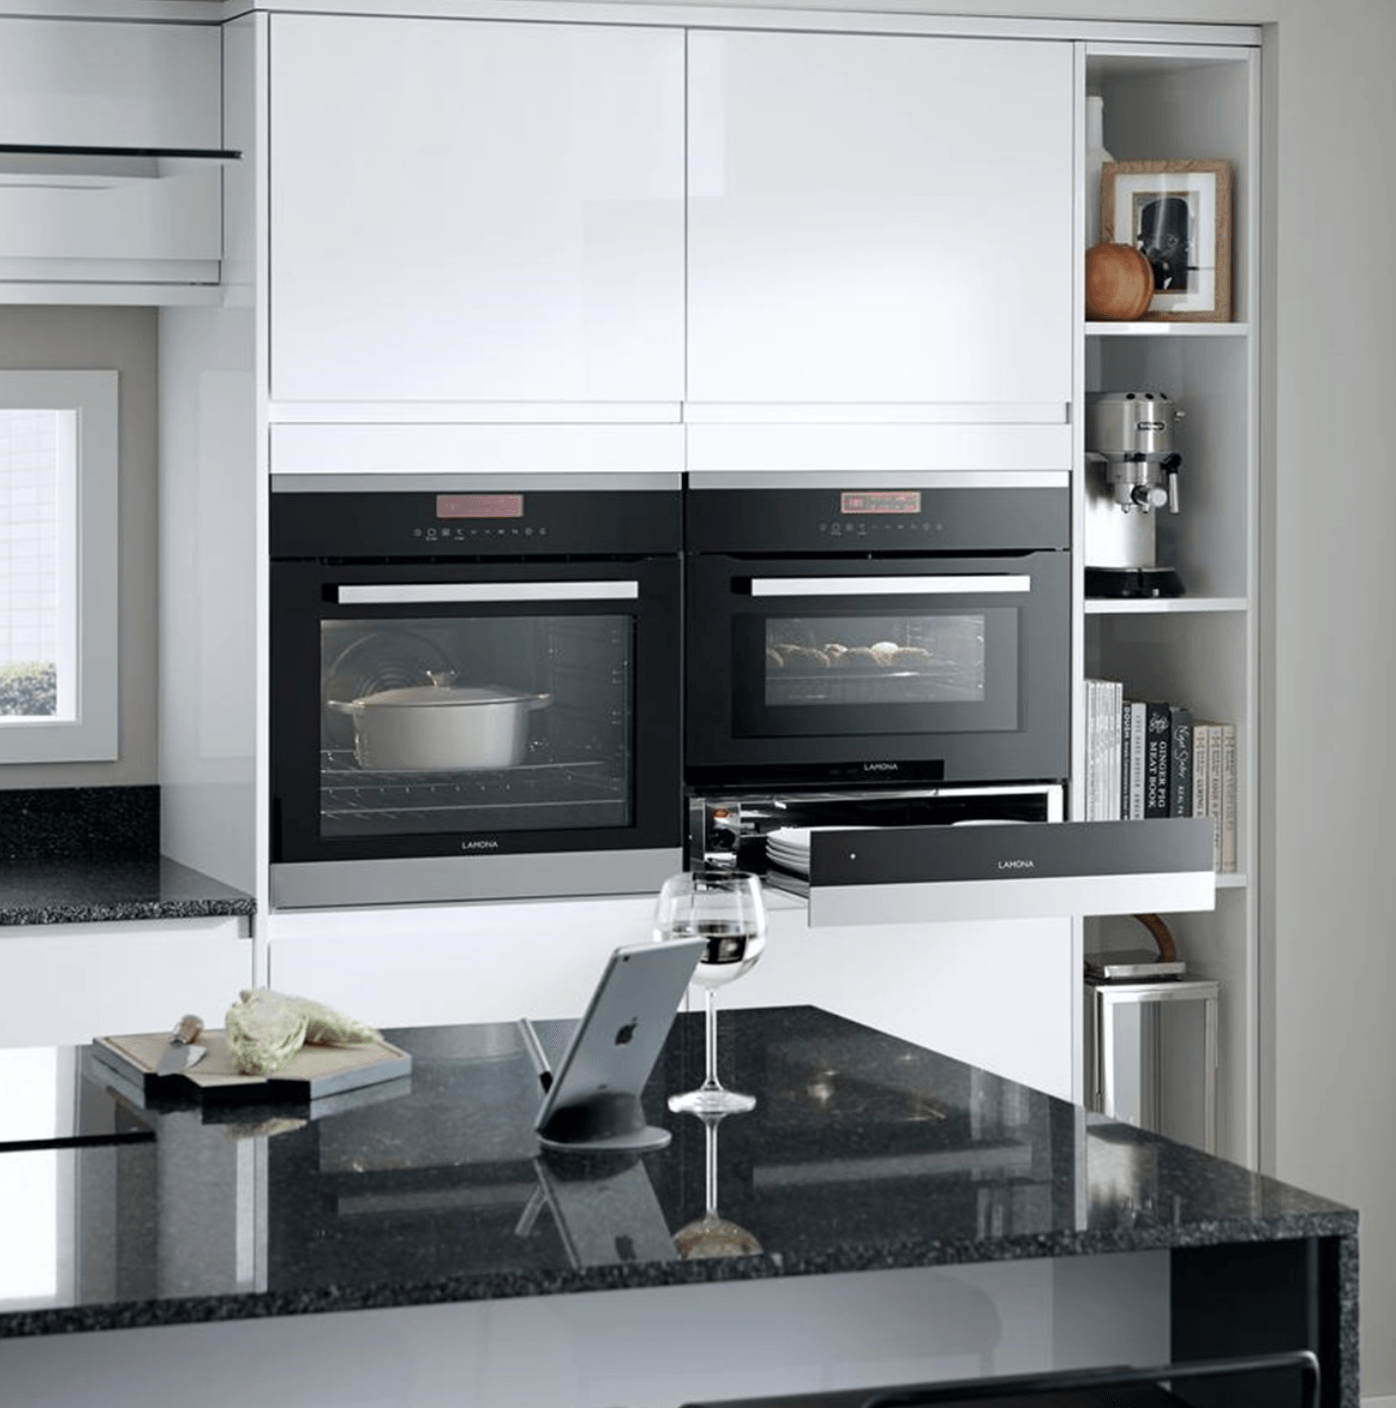 A kitchen with two ovens and a glass of wine